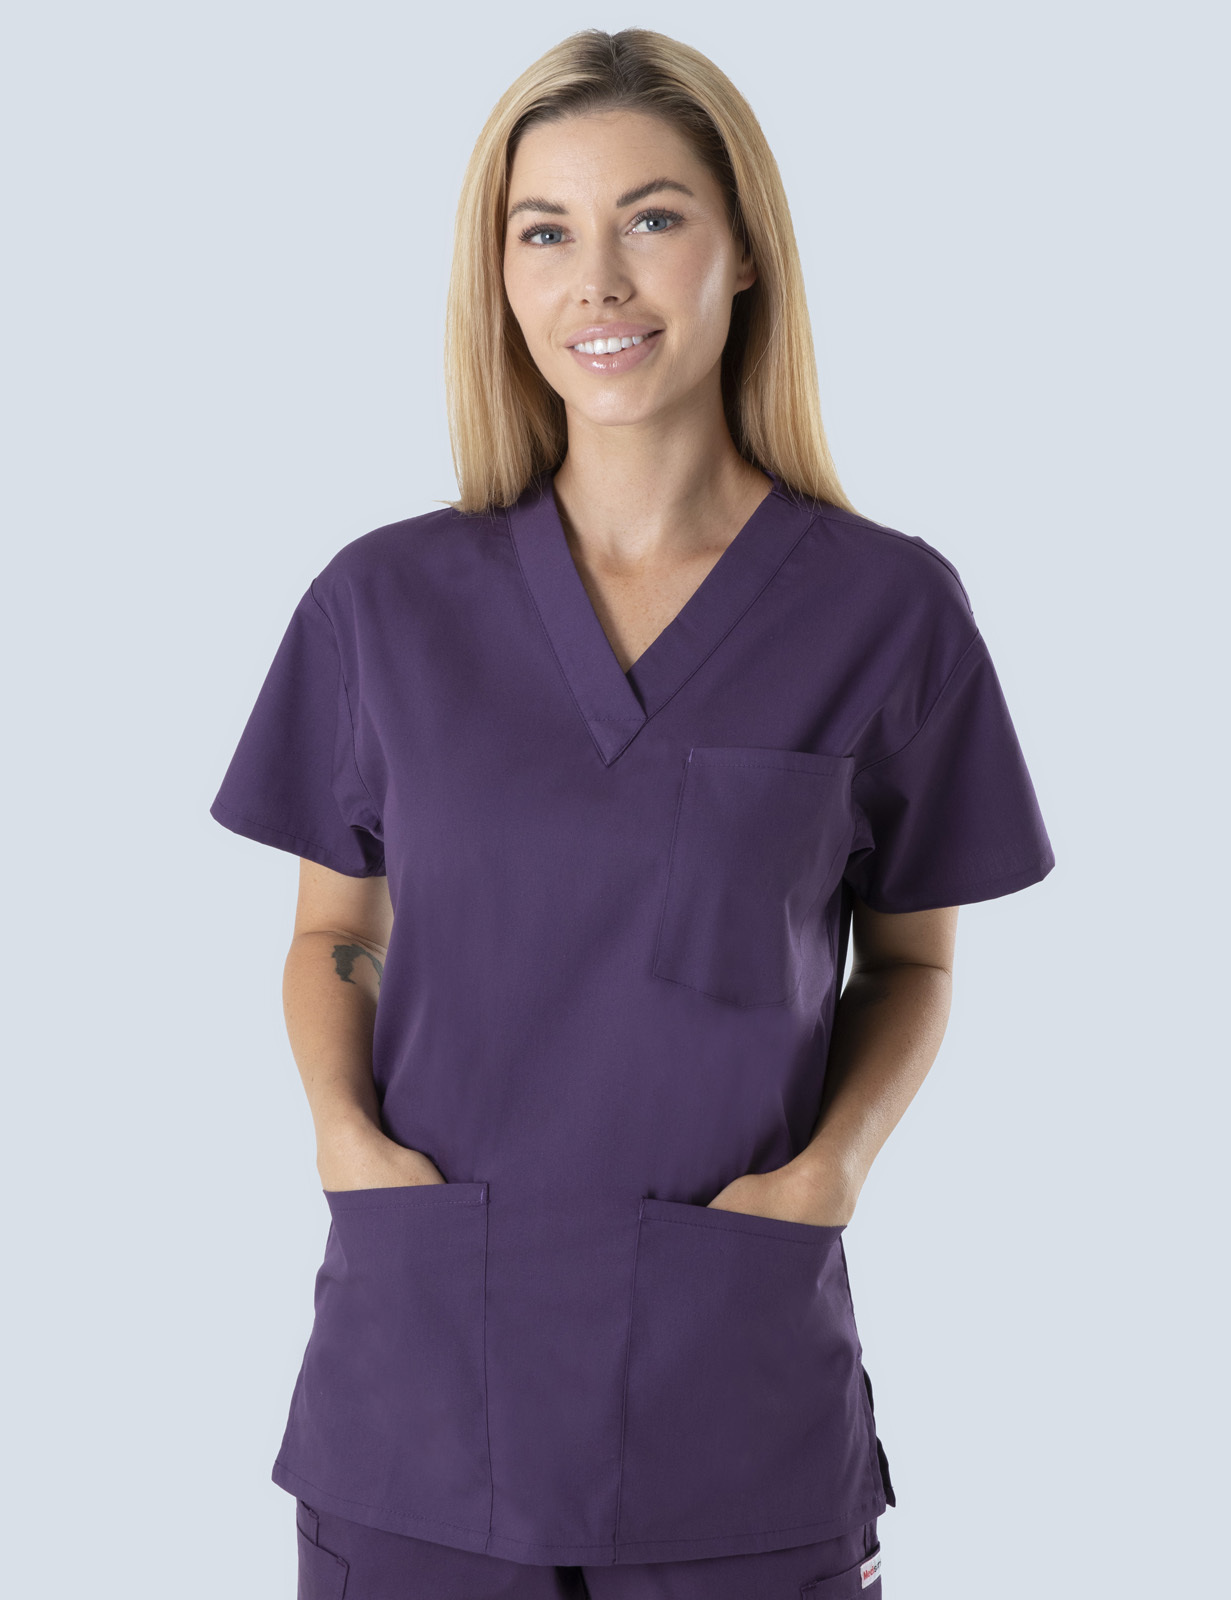 Ipswich Hospital HITH Uniform Top Only Bundle ( 4 Pocket Top in Aubergine incl Logos)